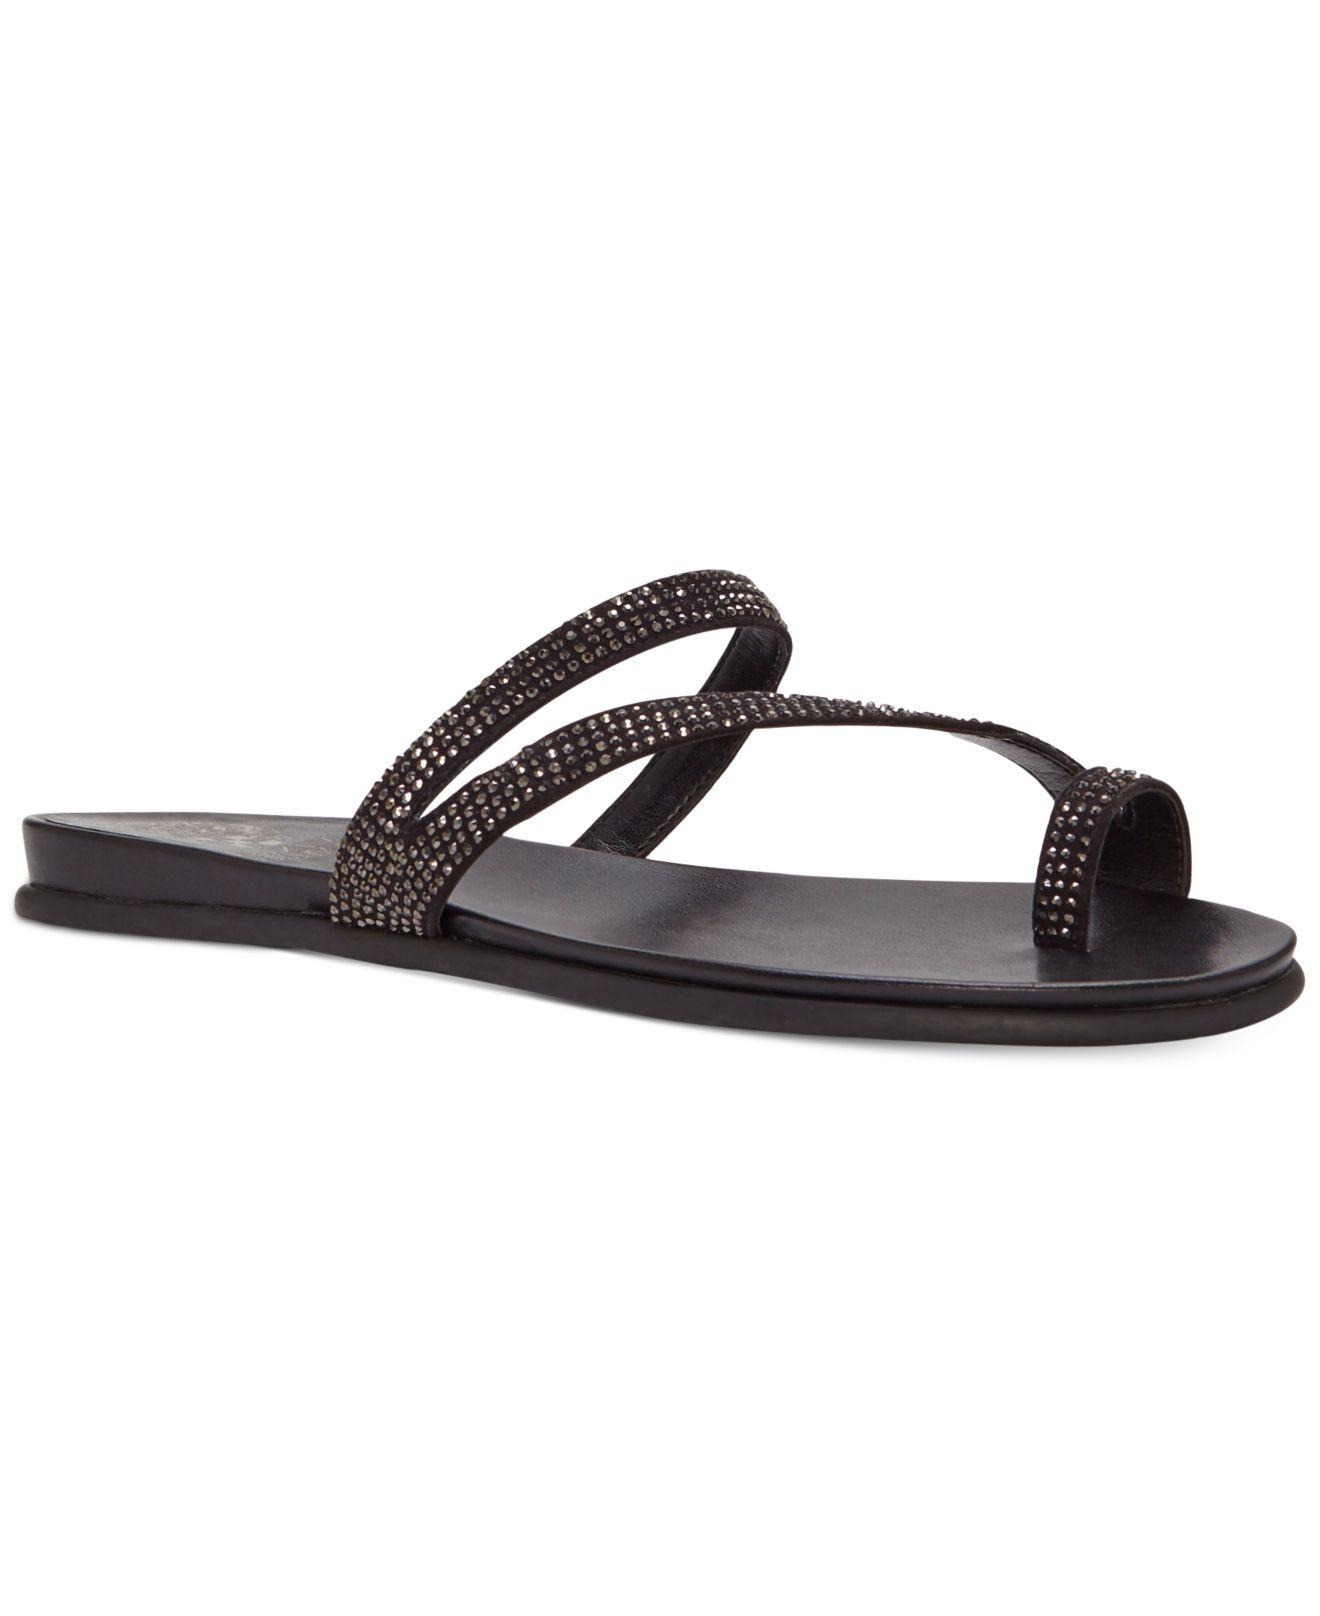 Vince Camuto Evina Jeweled Flat Sandals in Black - Lyst